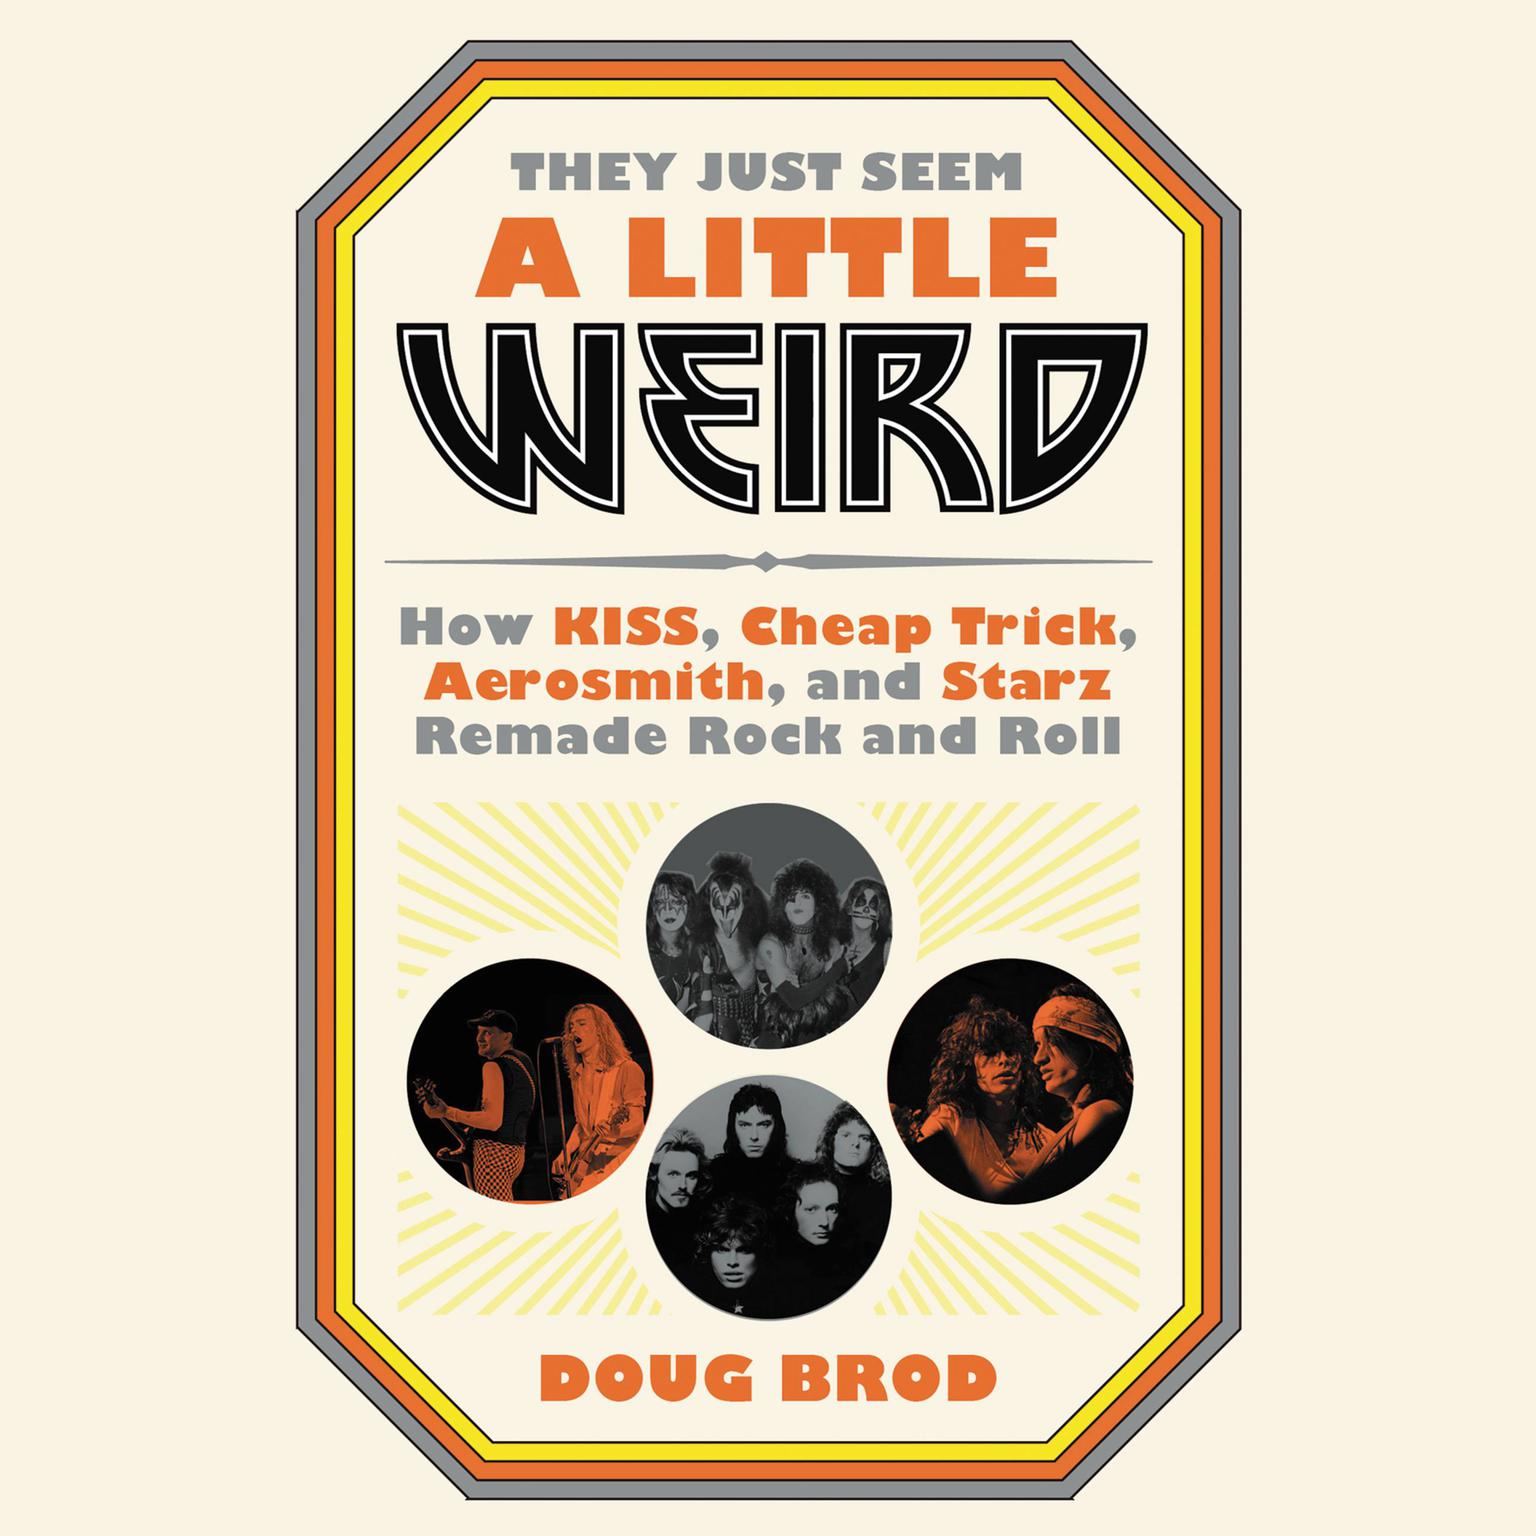 They Just Seem a Little Weird: How KISS, Cheap Trick, Aerosmith, and Starz Remade Rock and Roll Audiobook, by Doug Brod